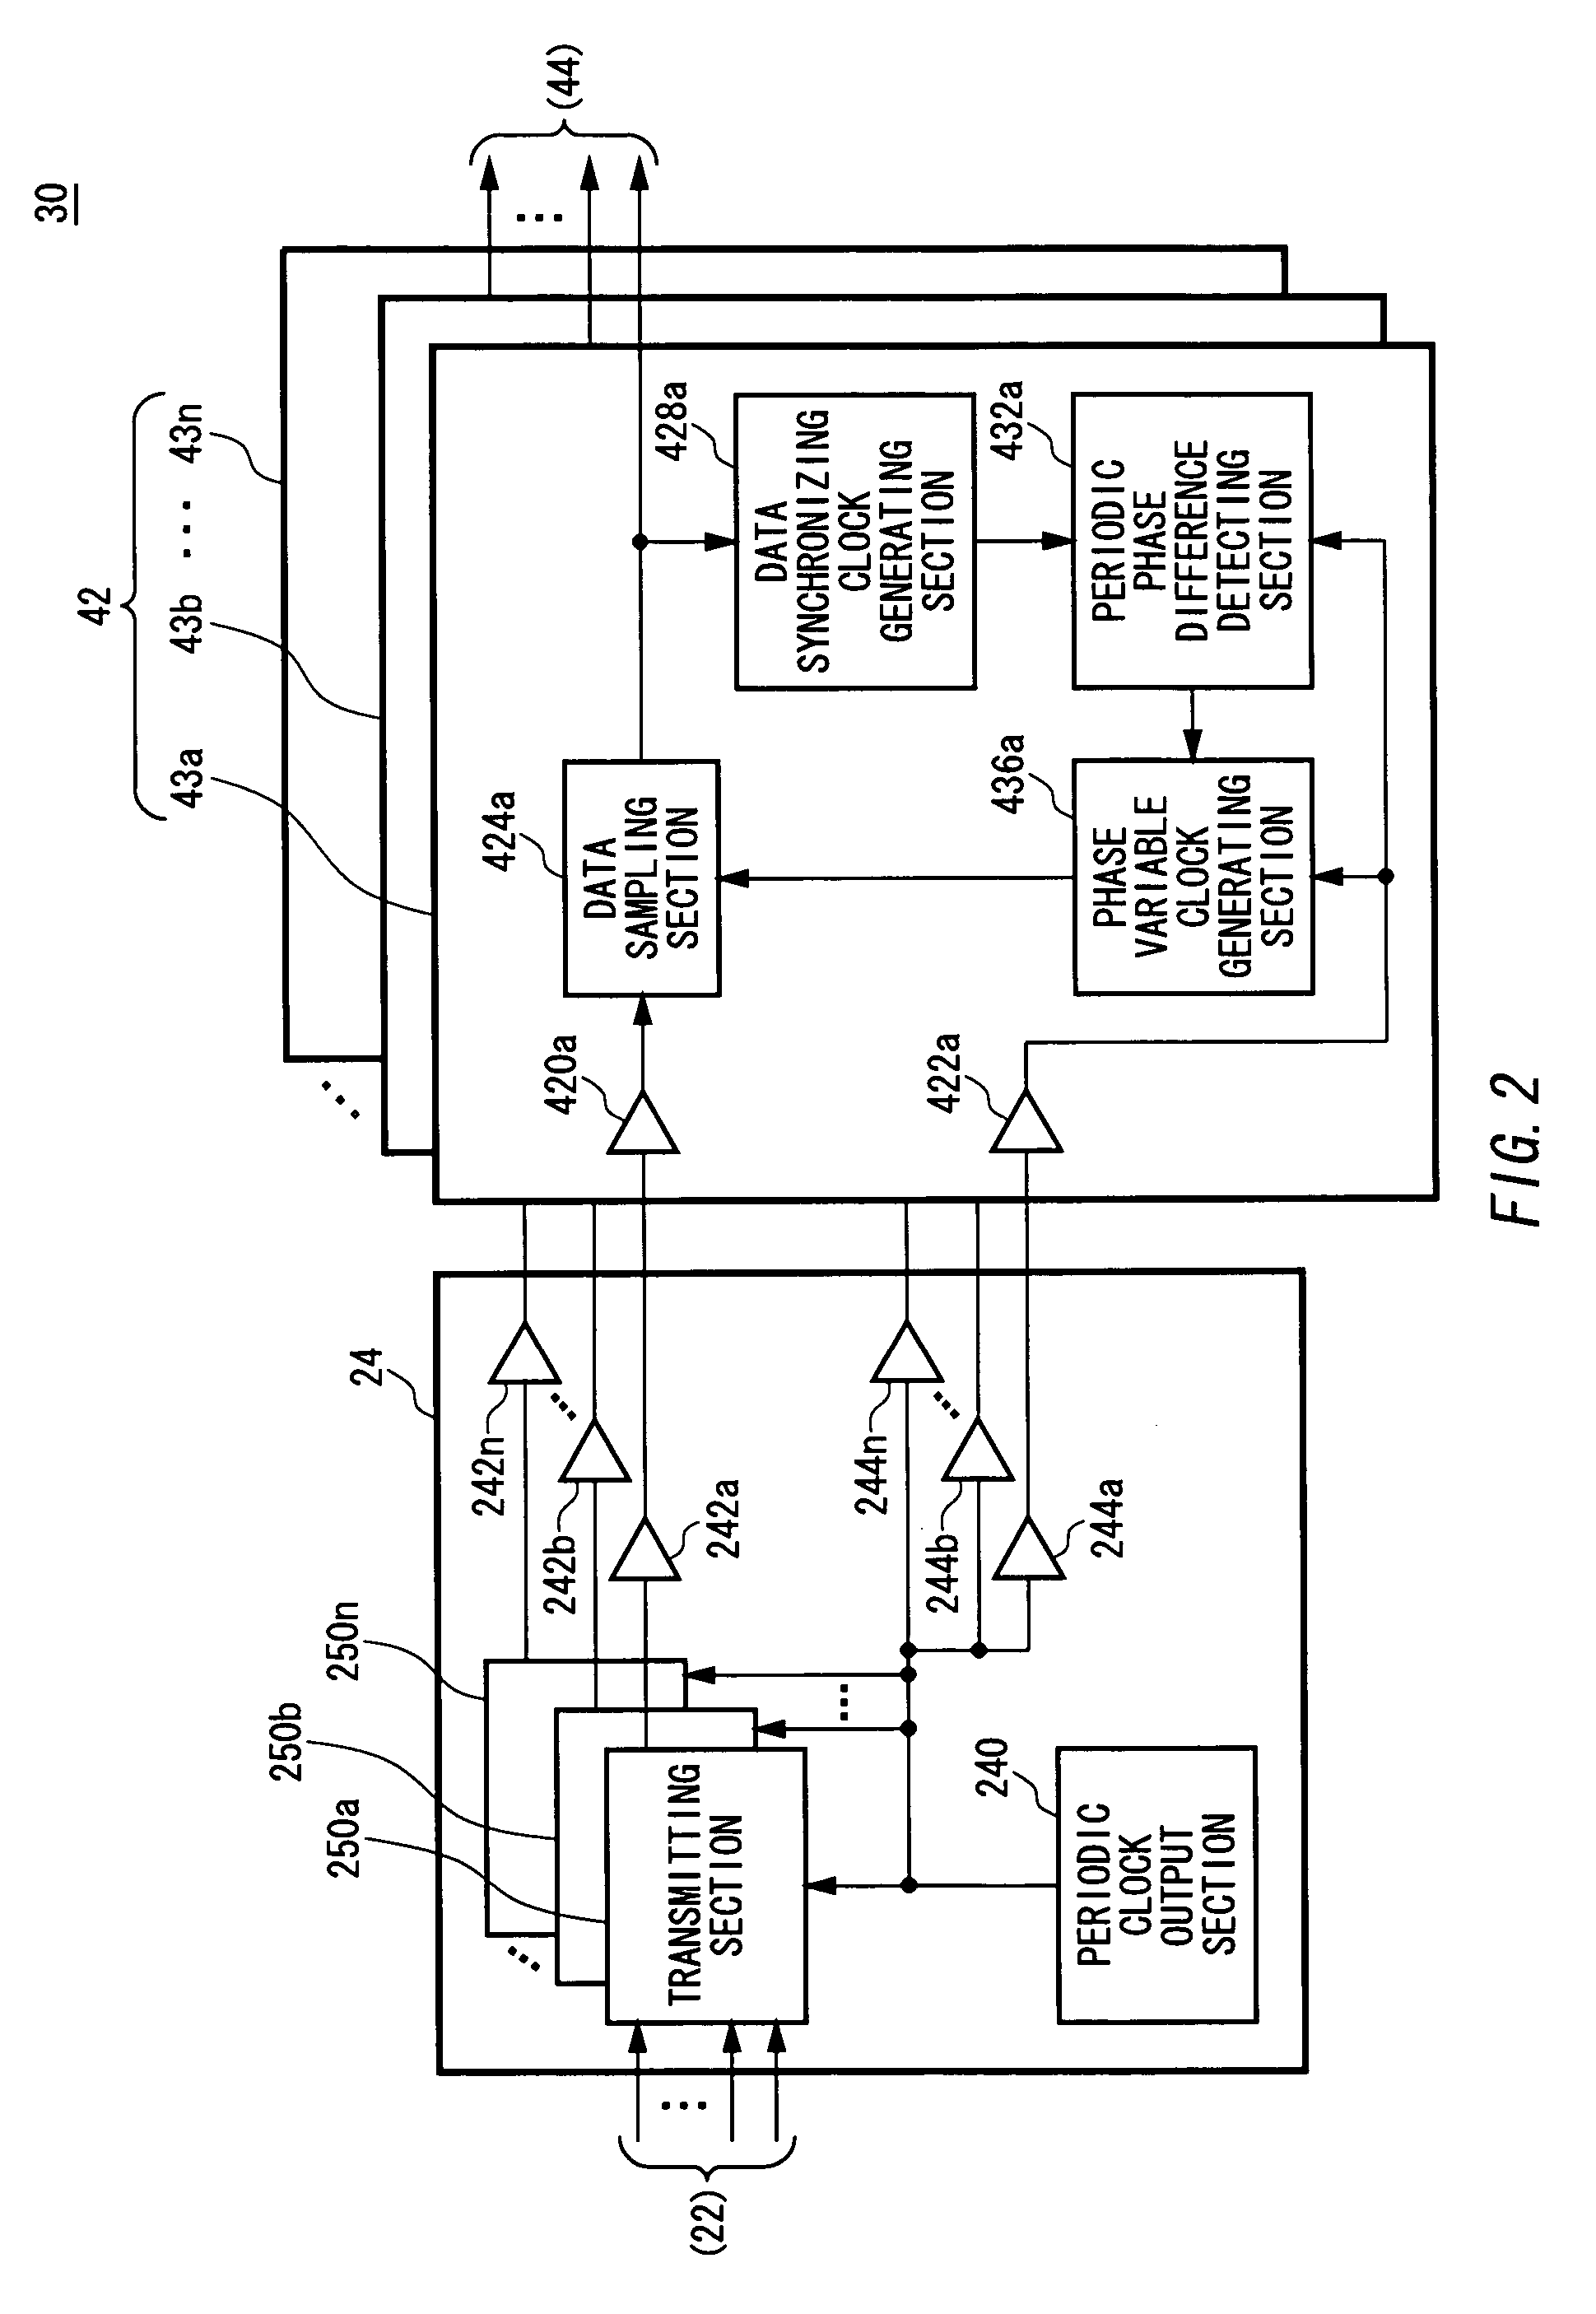 Transmission system, signal receiver, test apparatus and test head